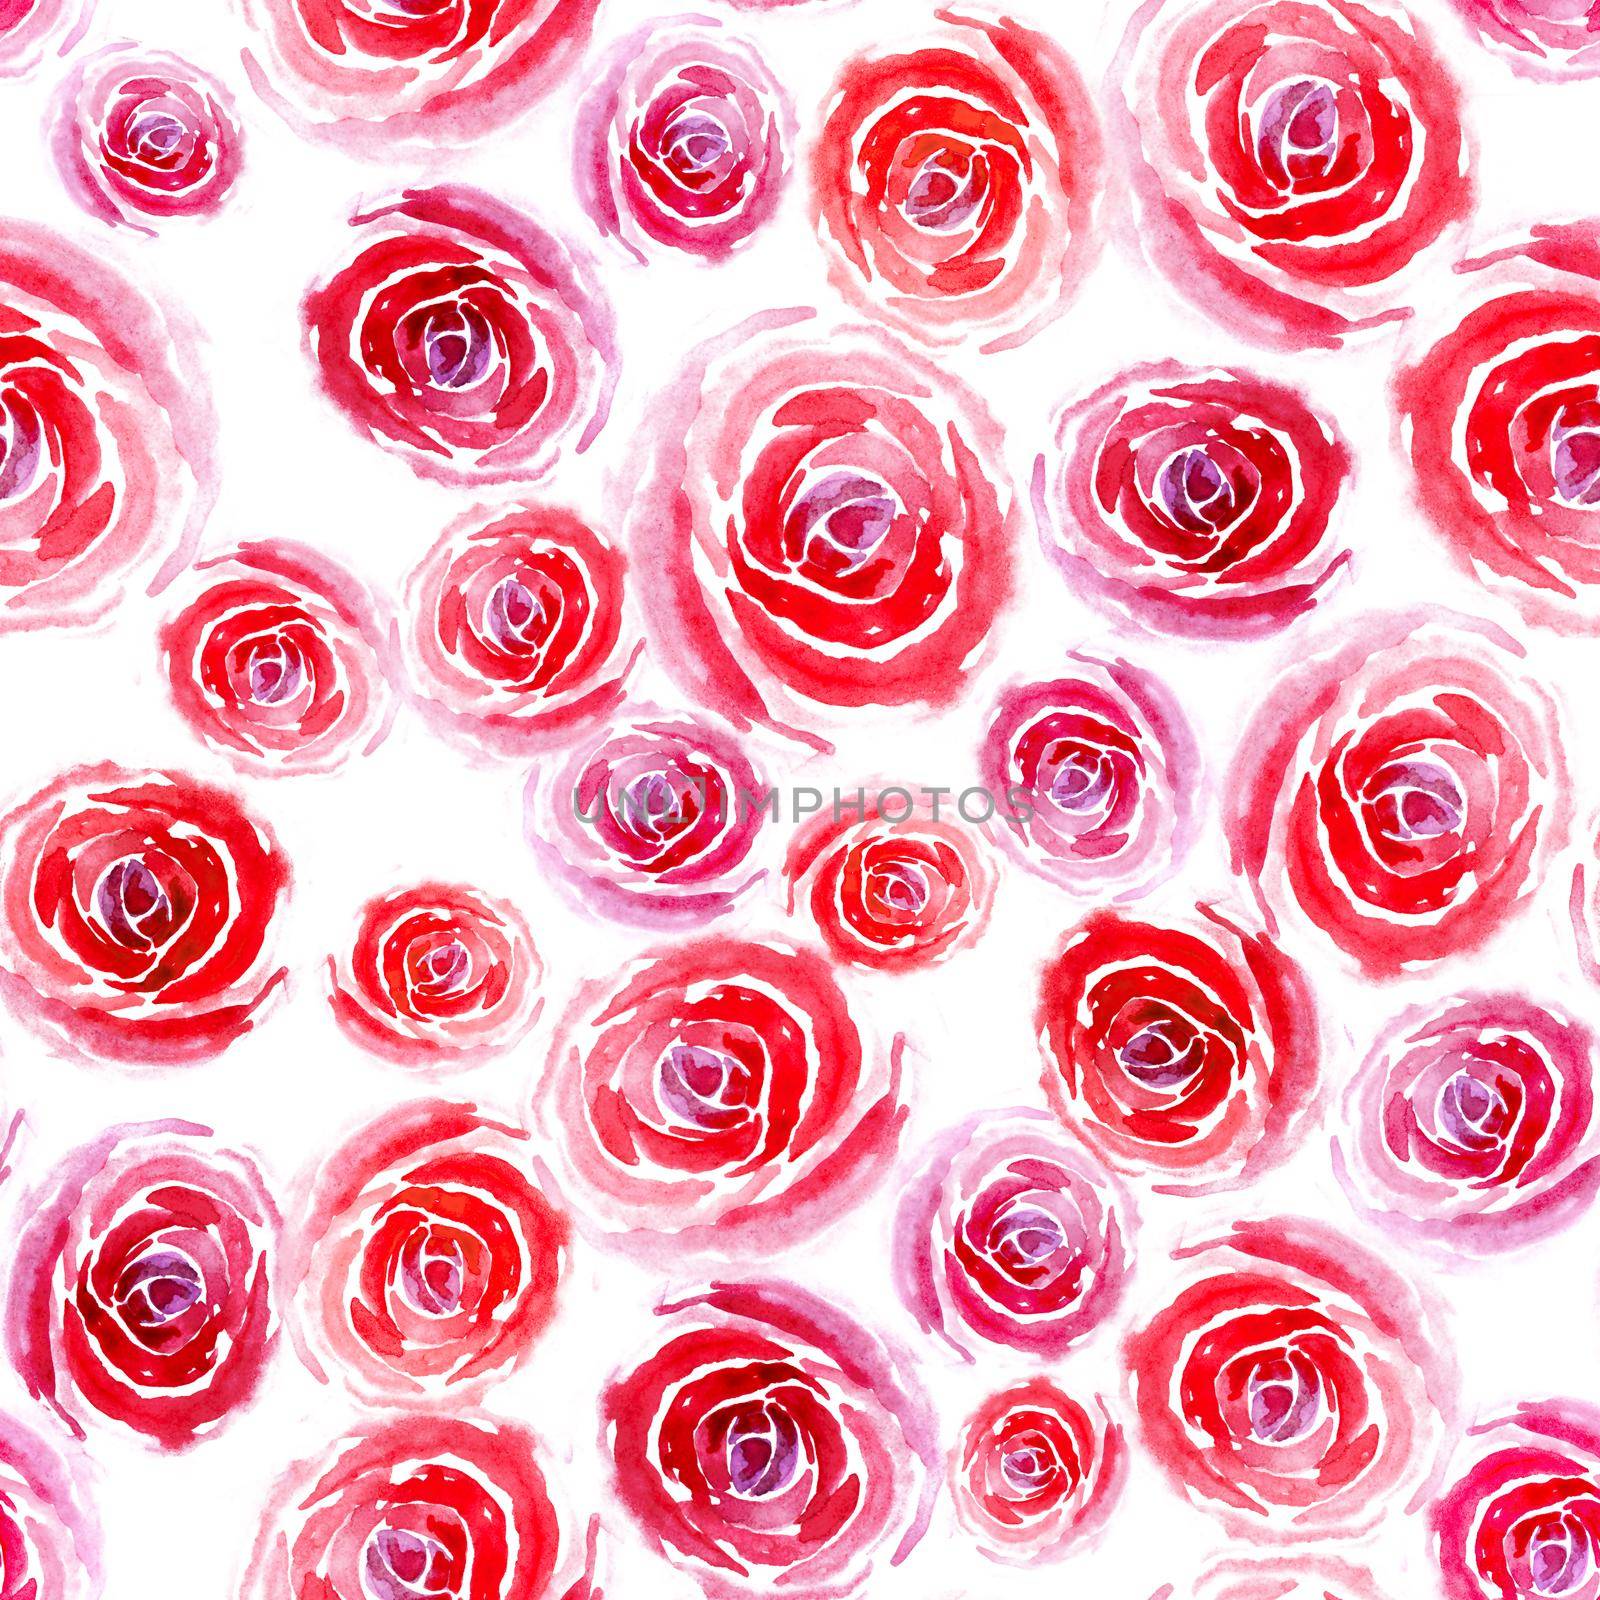 Seamless pattern of pink and red roses of different sizes on a white background. Beautiful flowers. Watercolor illustration for textile design, cover, wallpaper, wrapping paper.